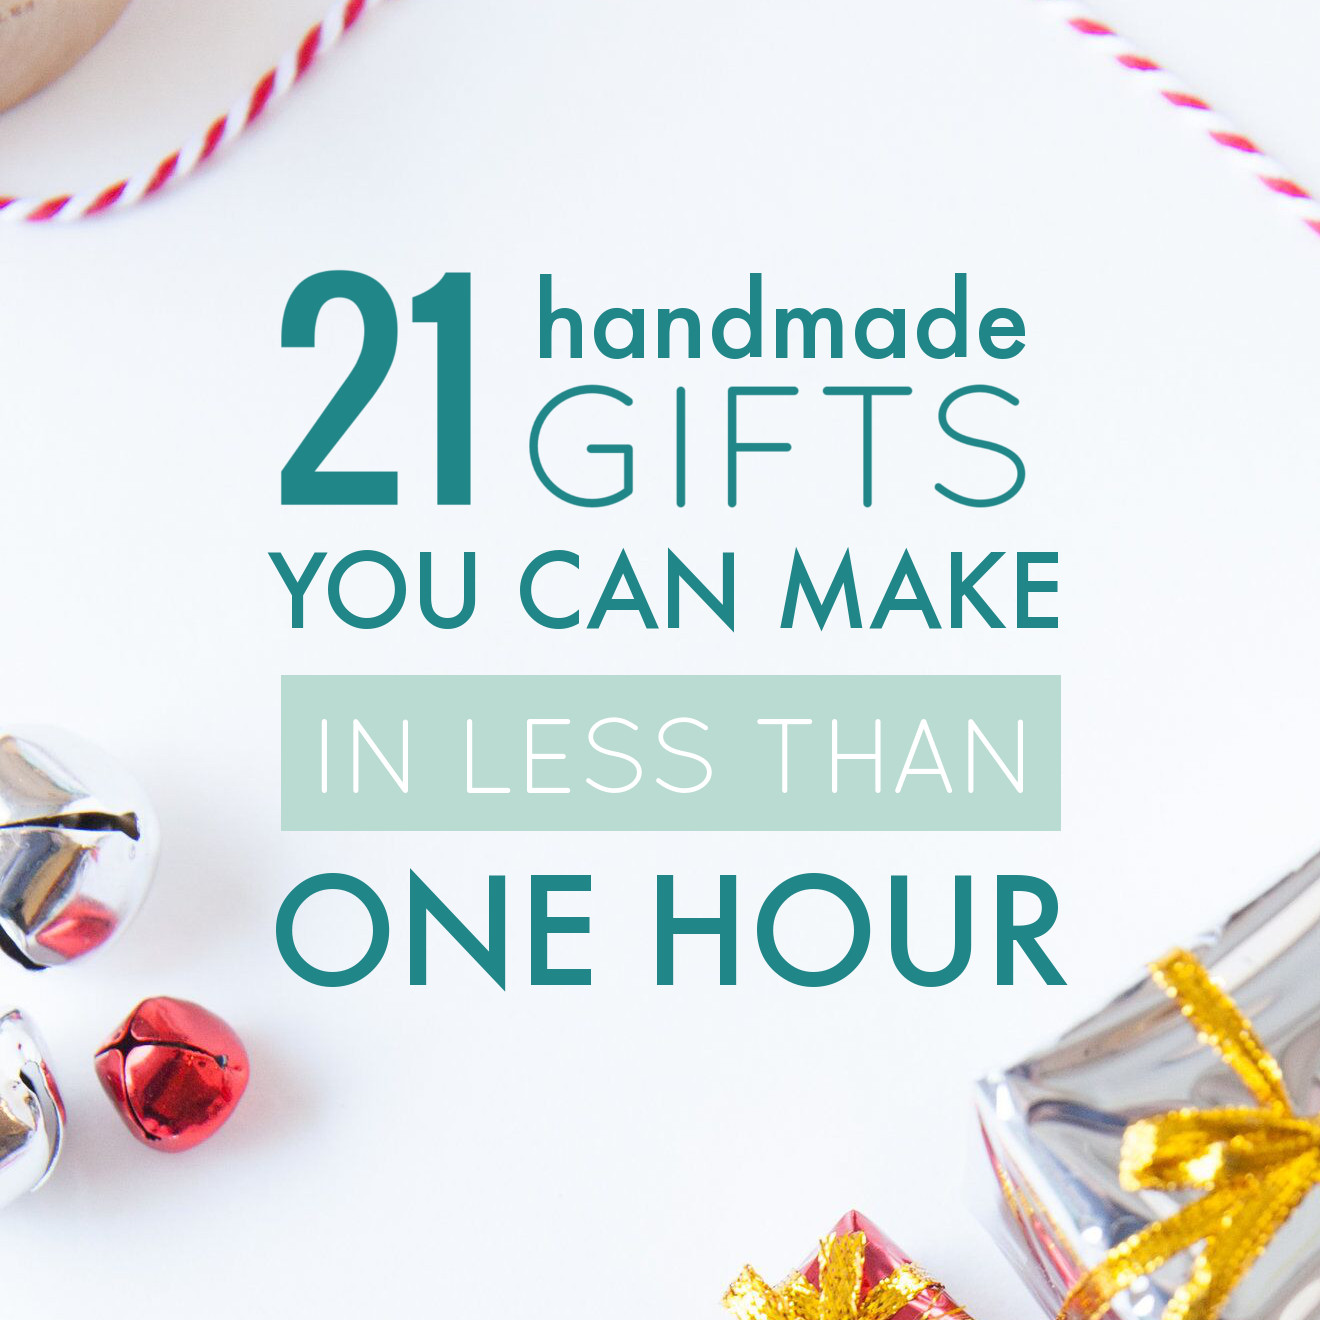 21 Handmade Gifts You Can Make in Less Than an Hour